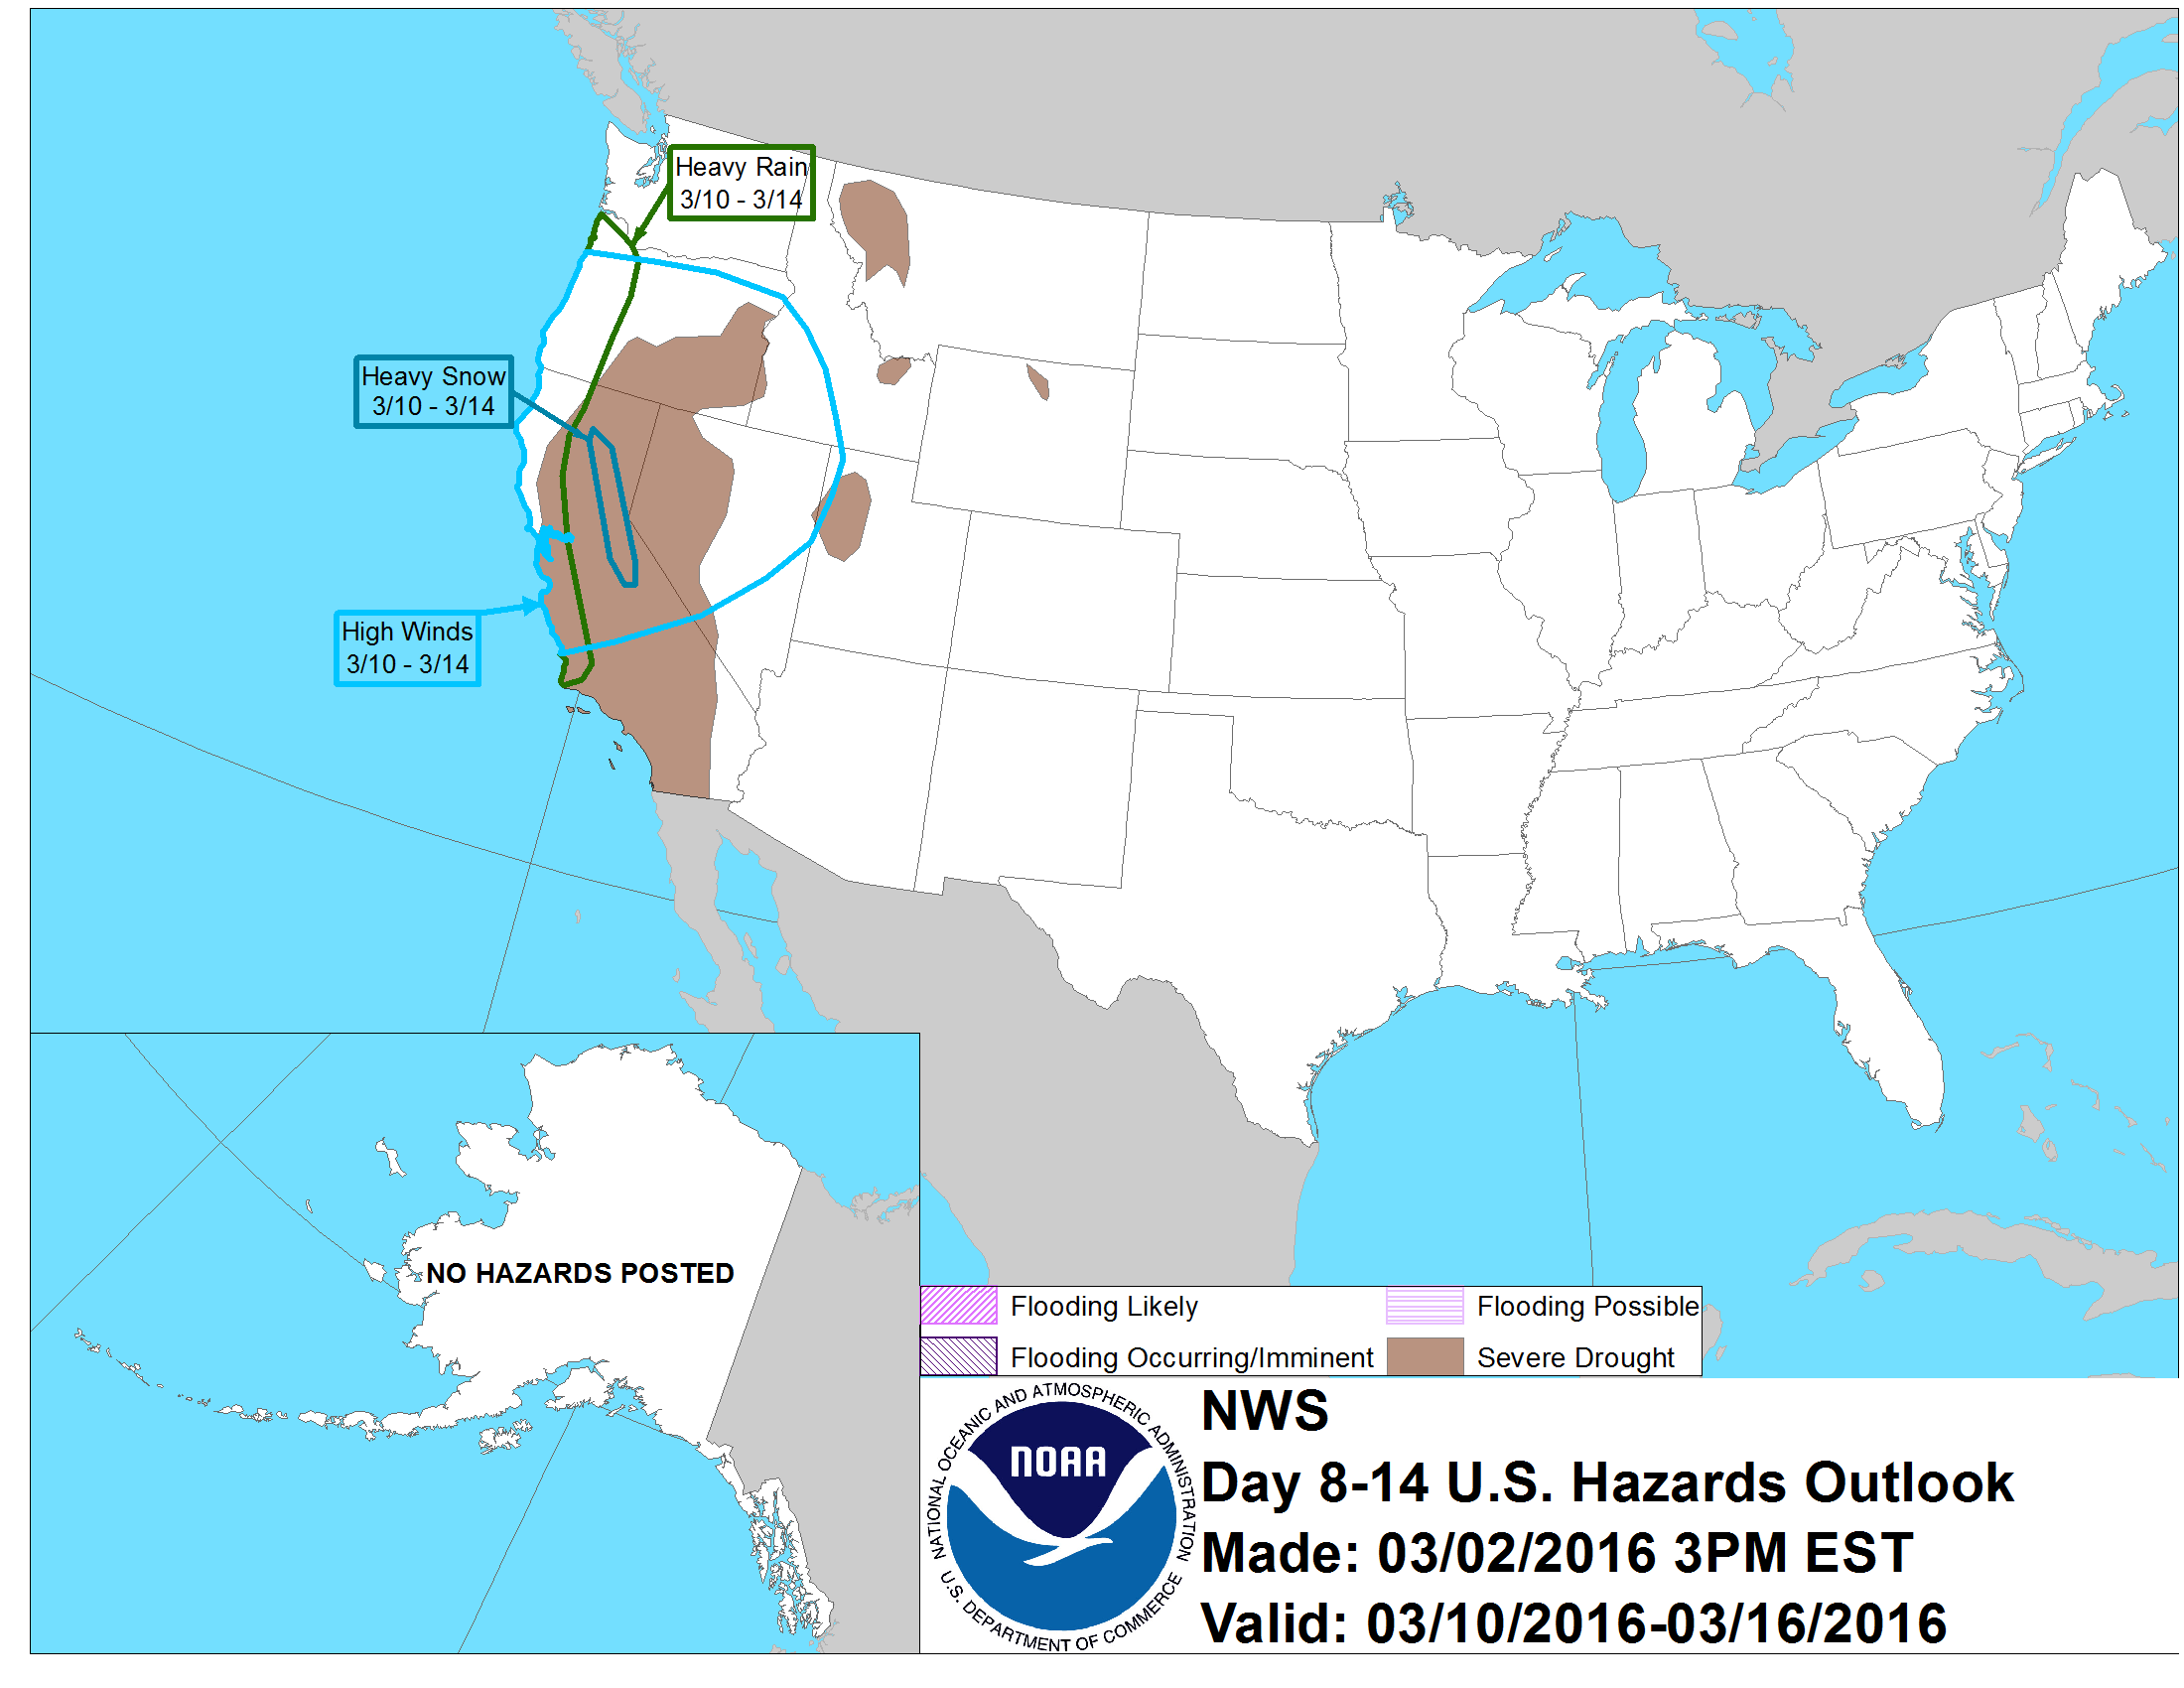 "Heavy snow" forecast in CA March 5-9th. image: noaa, today